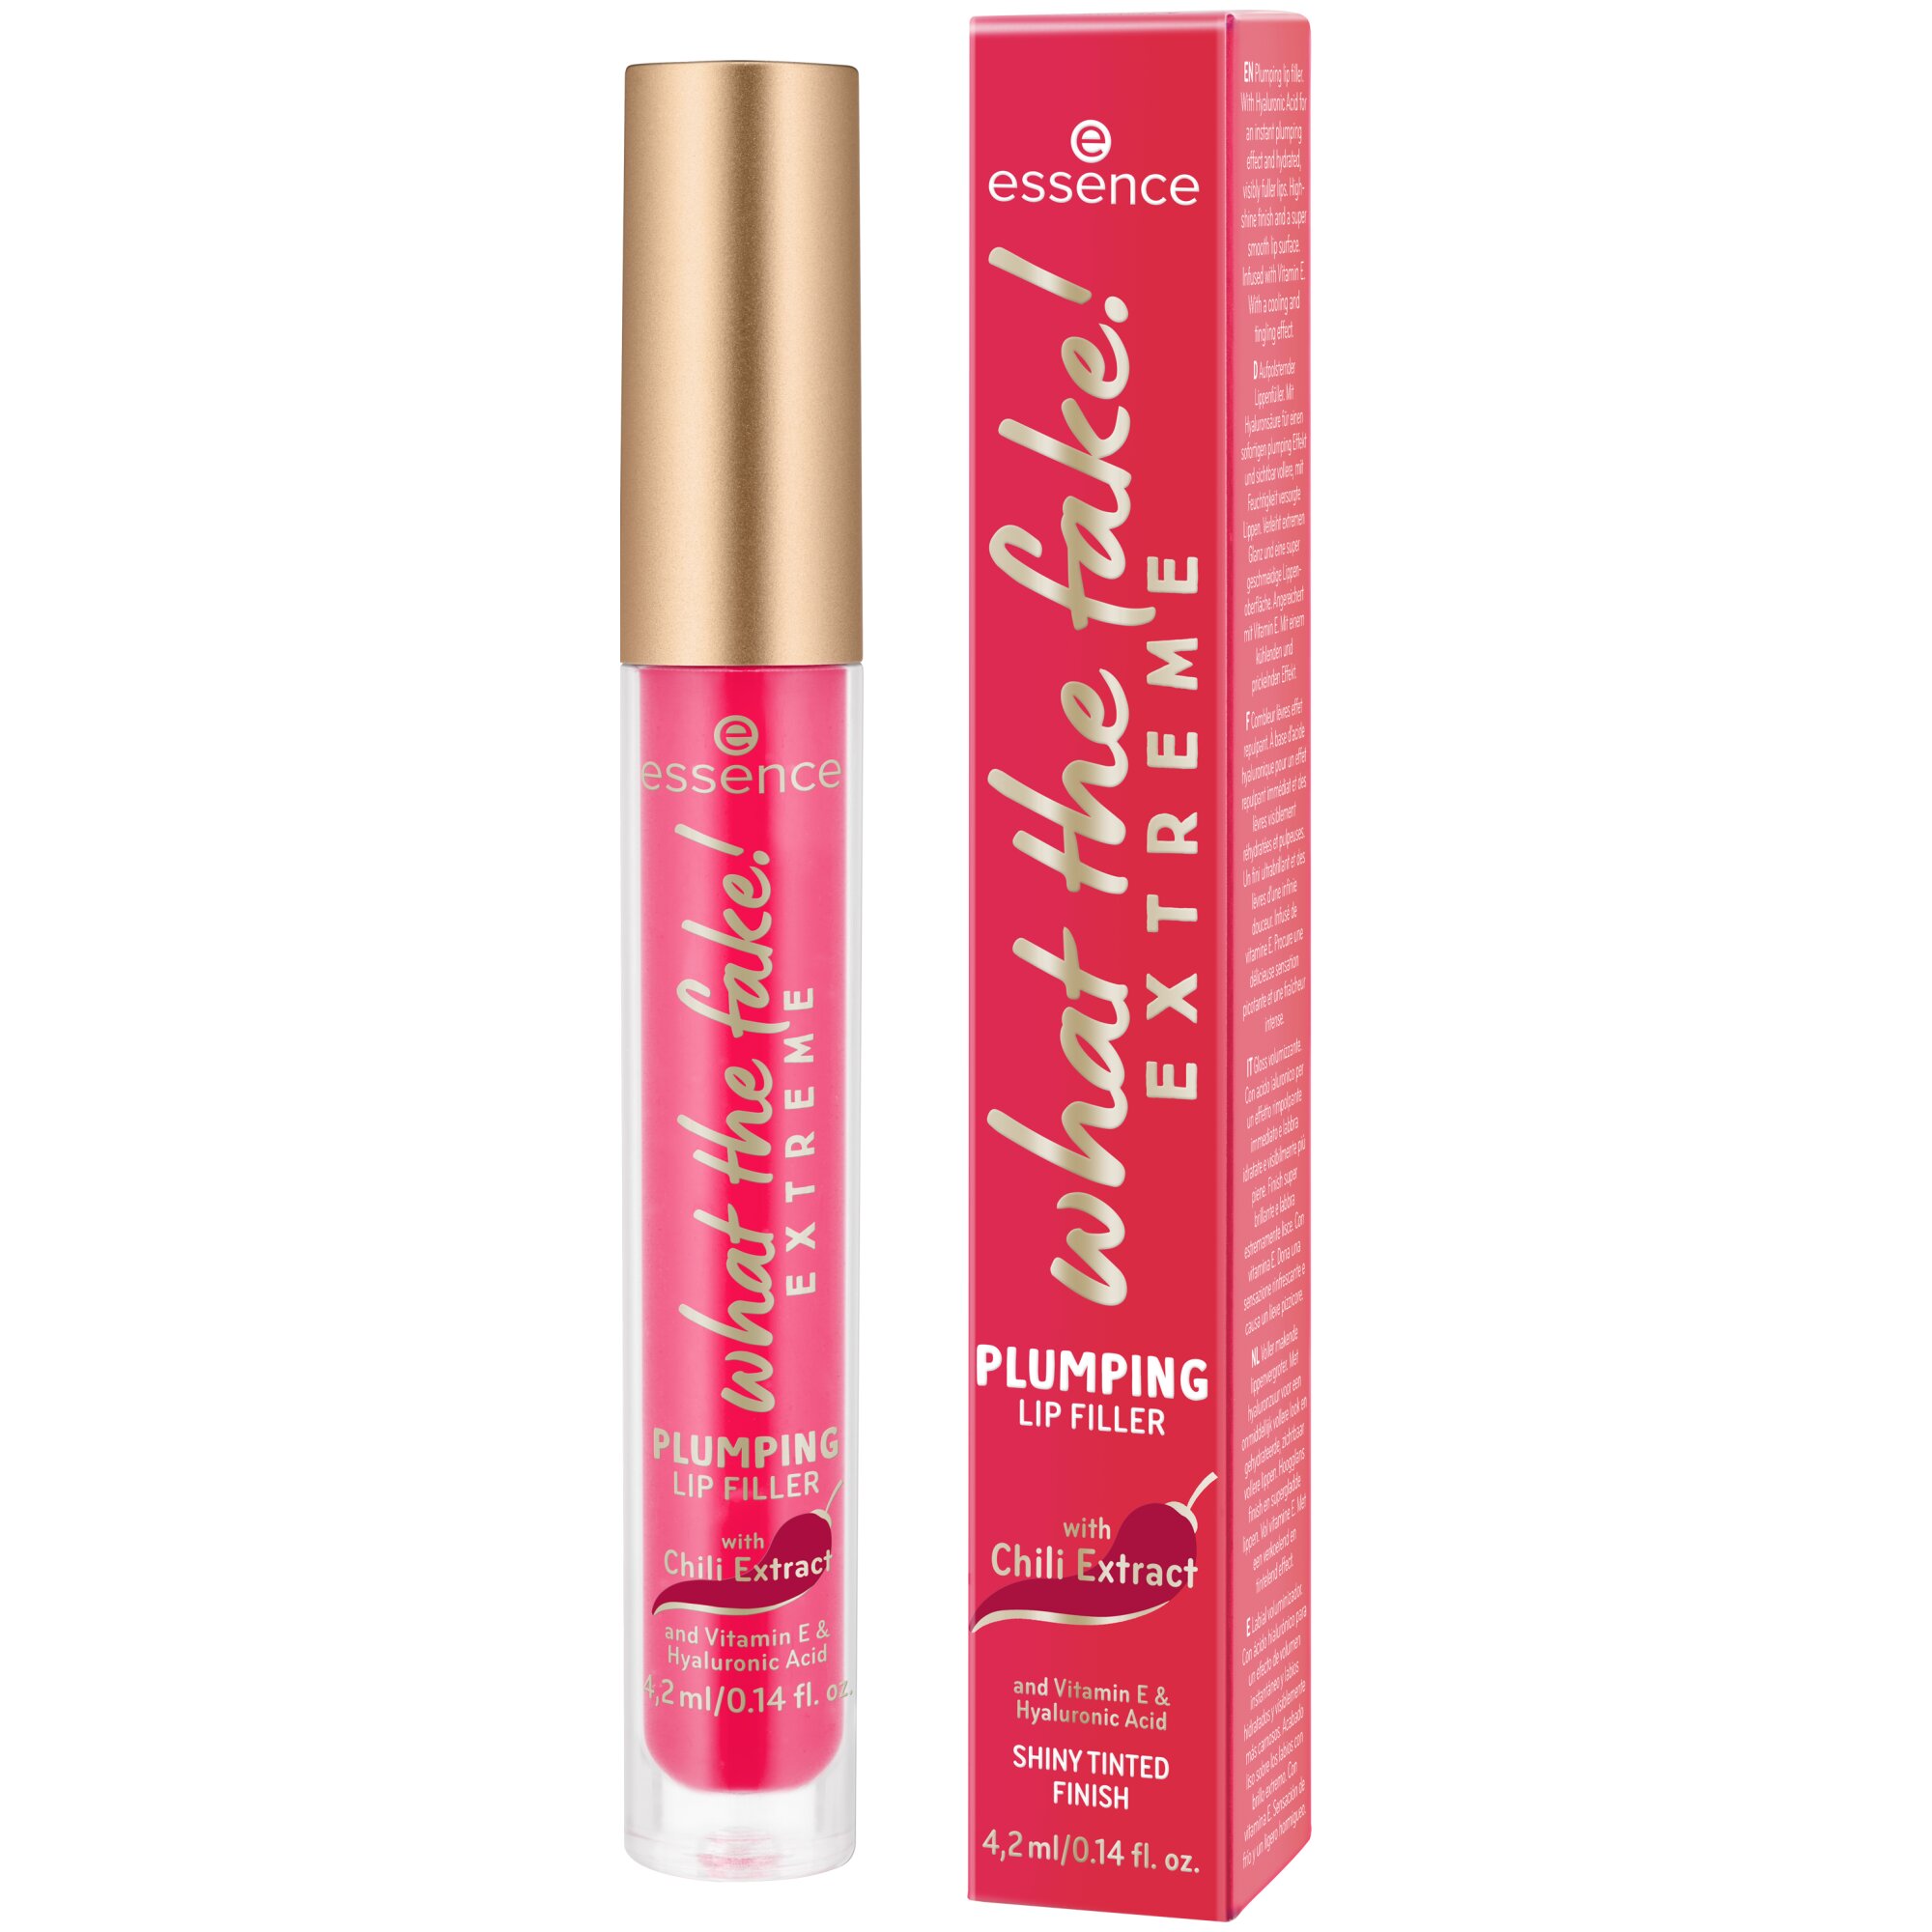 Luciu de buze Extreme Plumping Lip Filler What the fake!, 4.2 ml, Essence